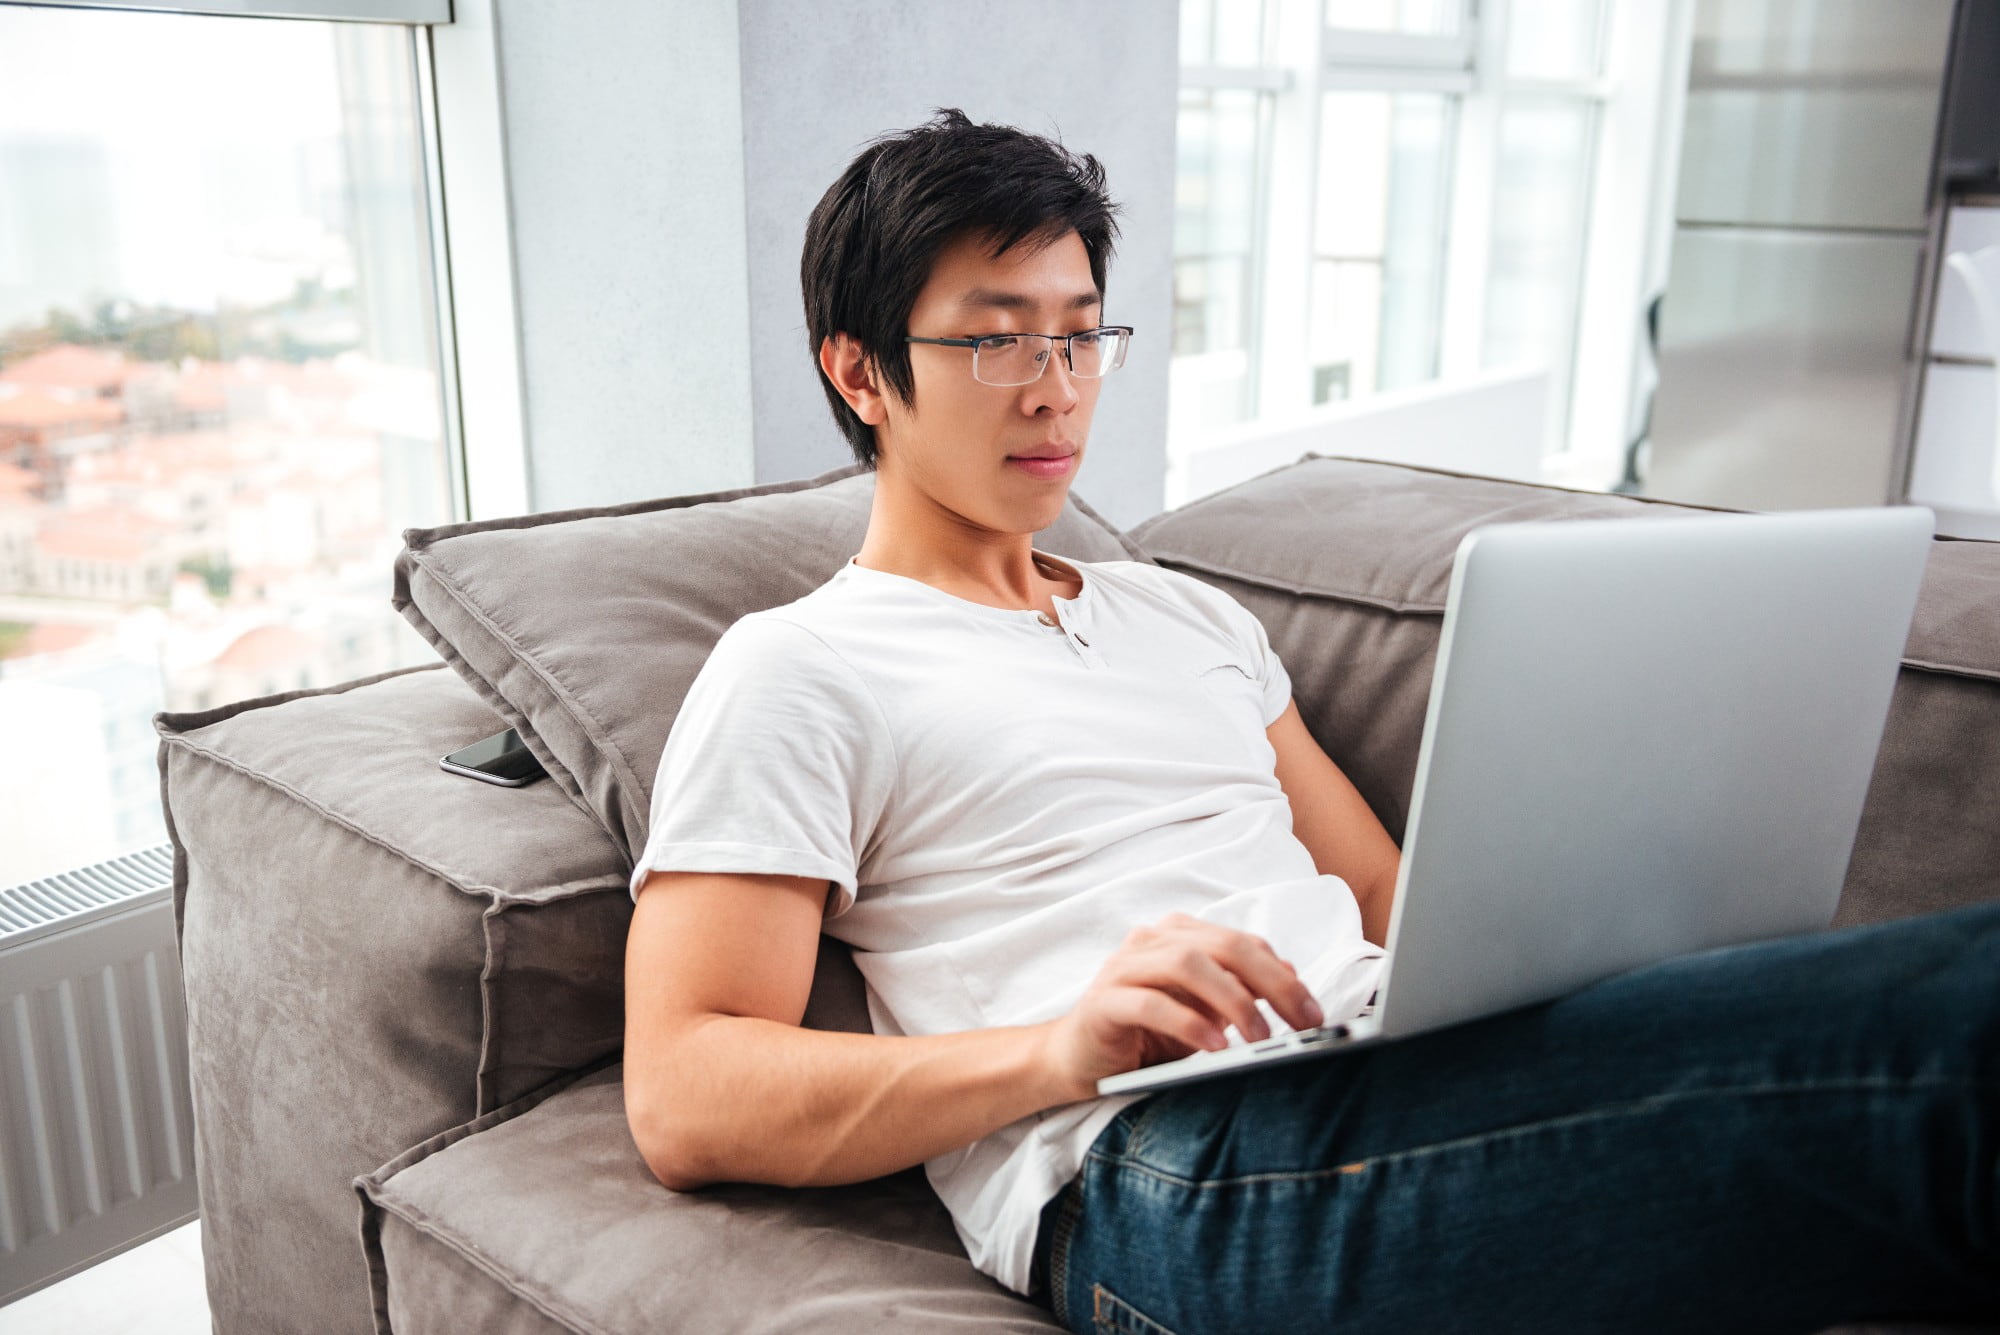 Man sitting down on a couch looking at a laptop